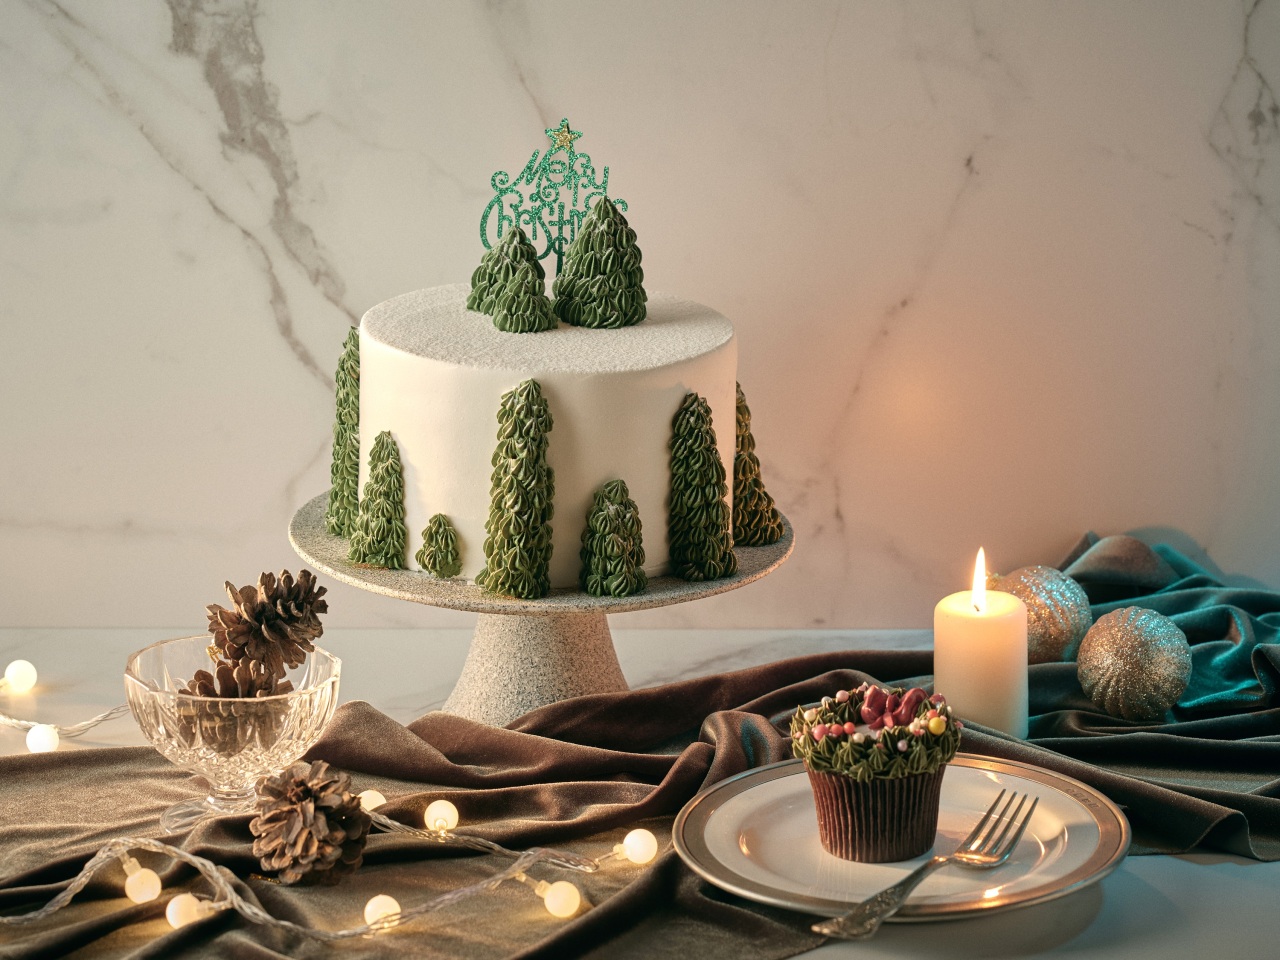 Christmas cake from Grand InterContinental Seoul Parmas